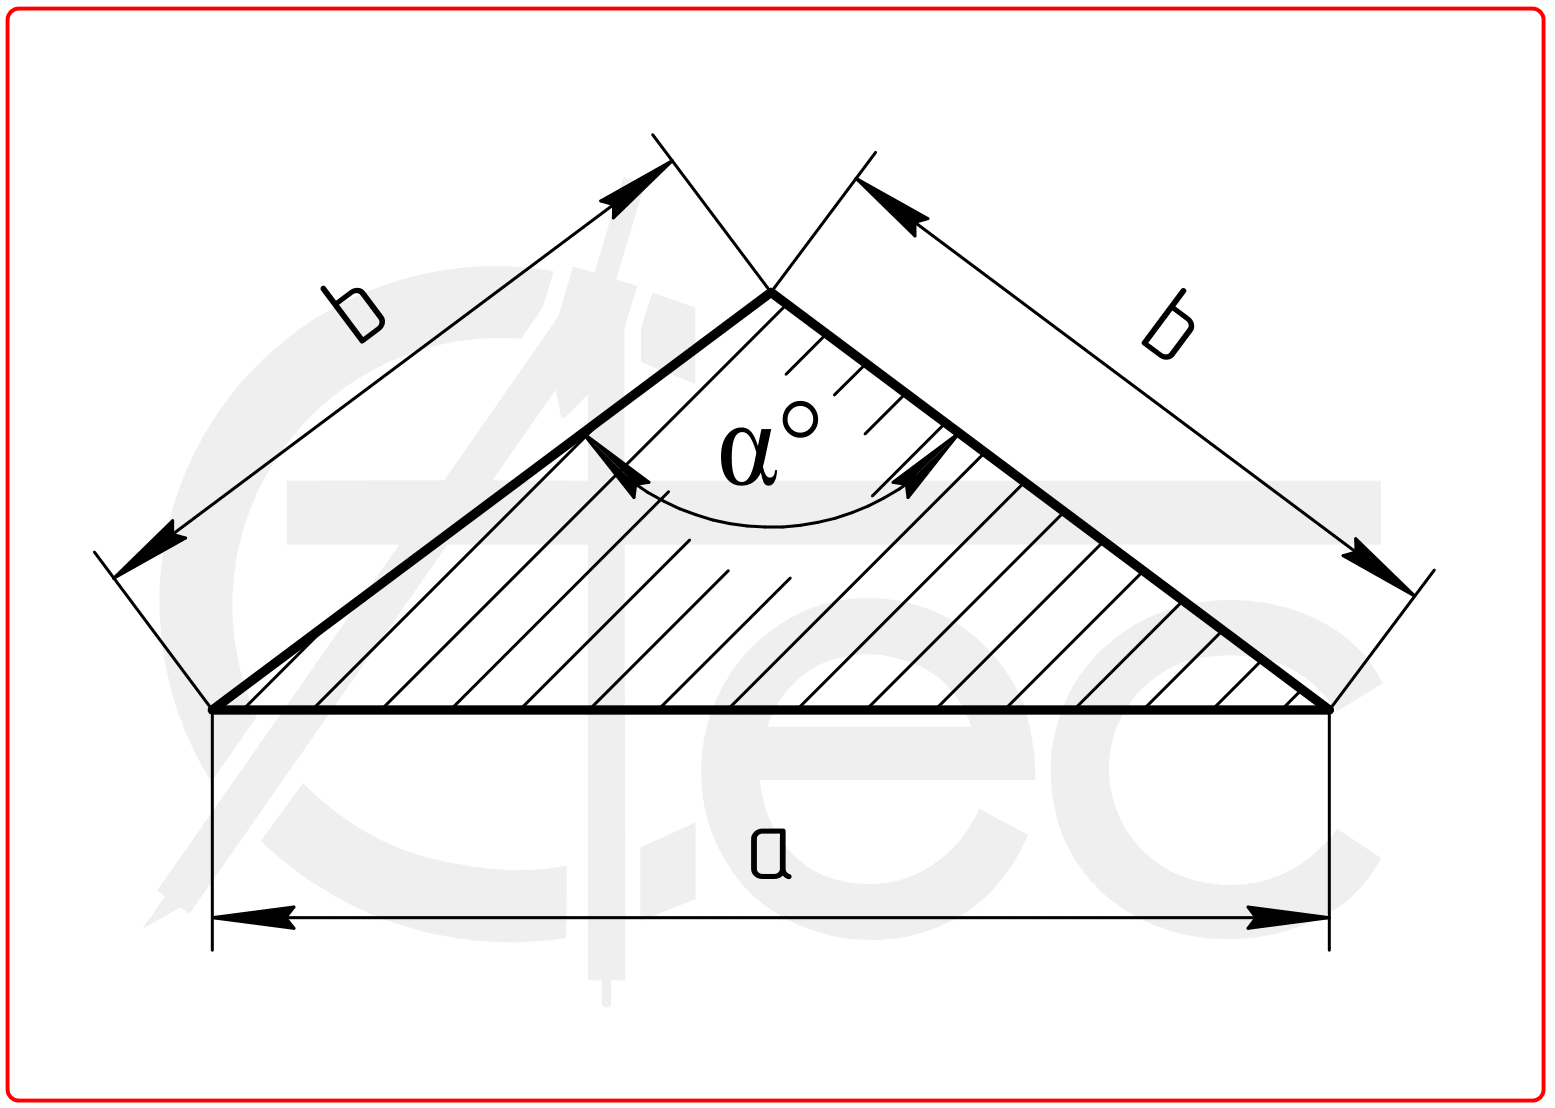 Calculation of Bar of triangle section under torsion